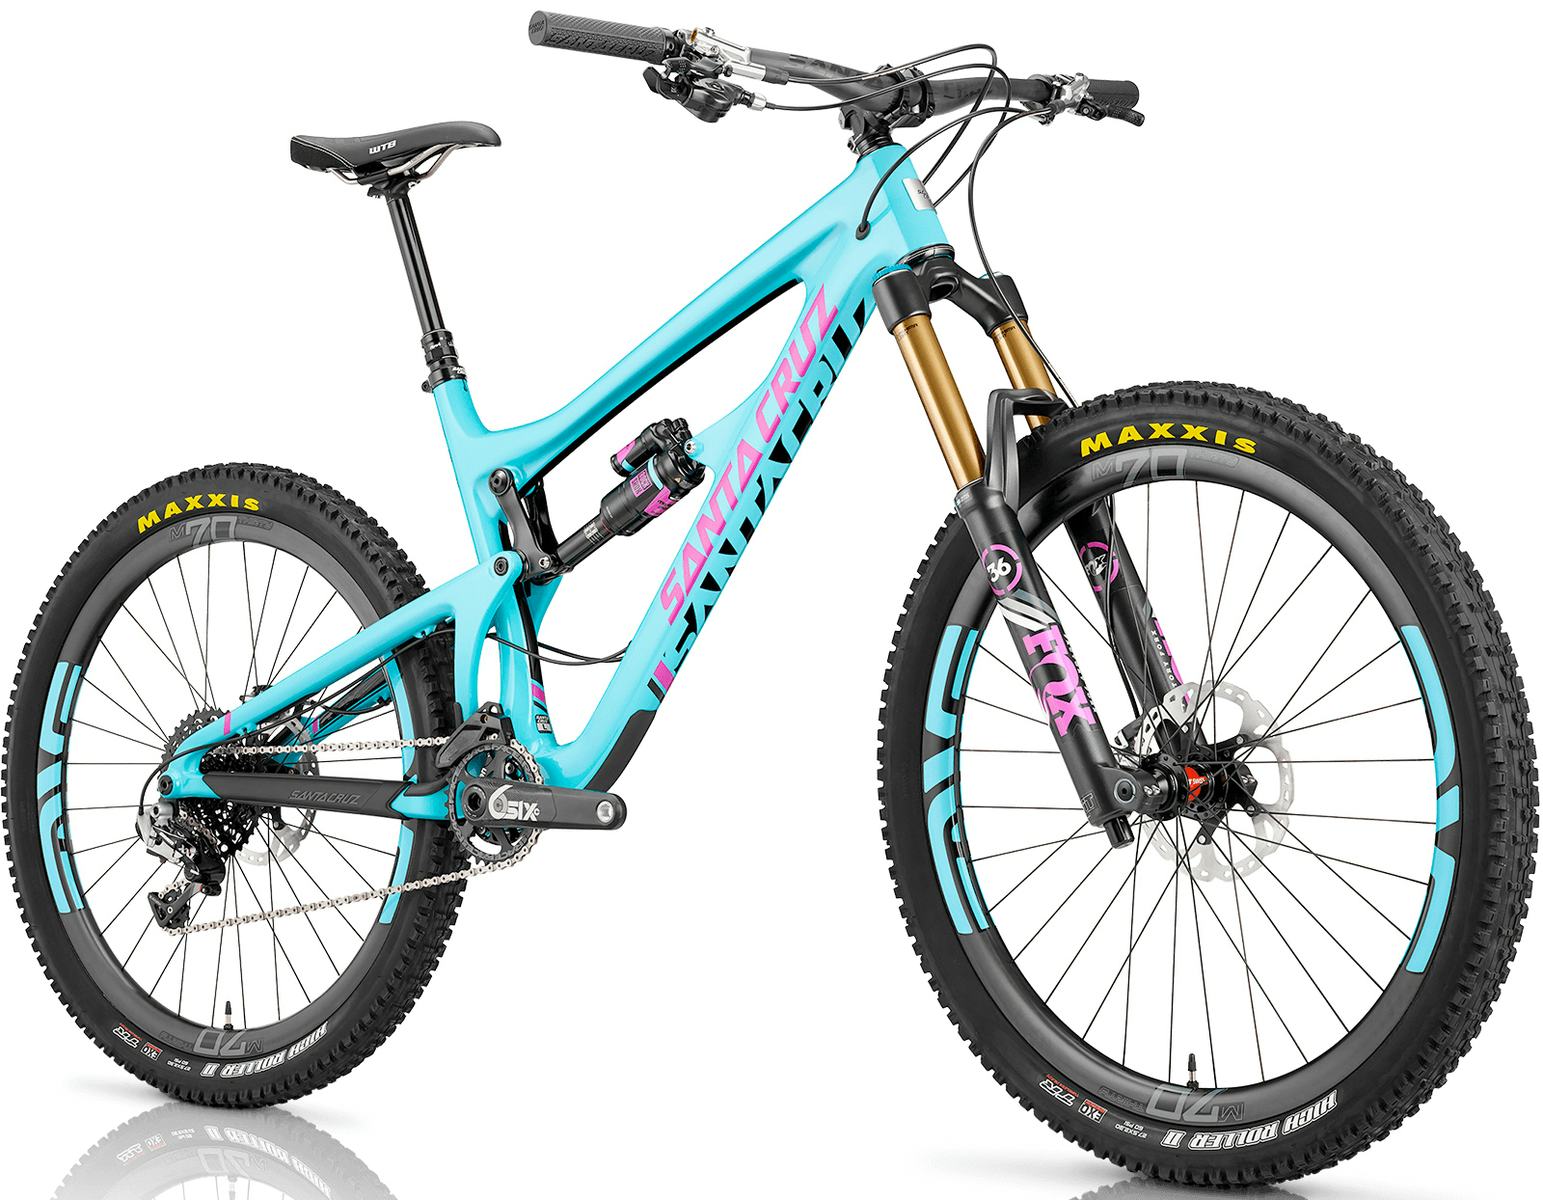 Santa Cruz Nomad with Carbon Chassis